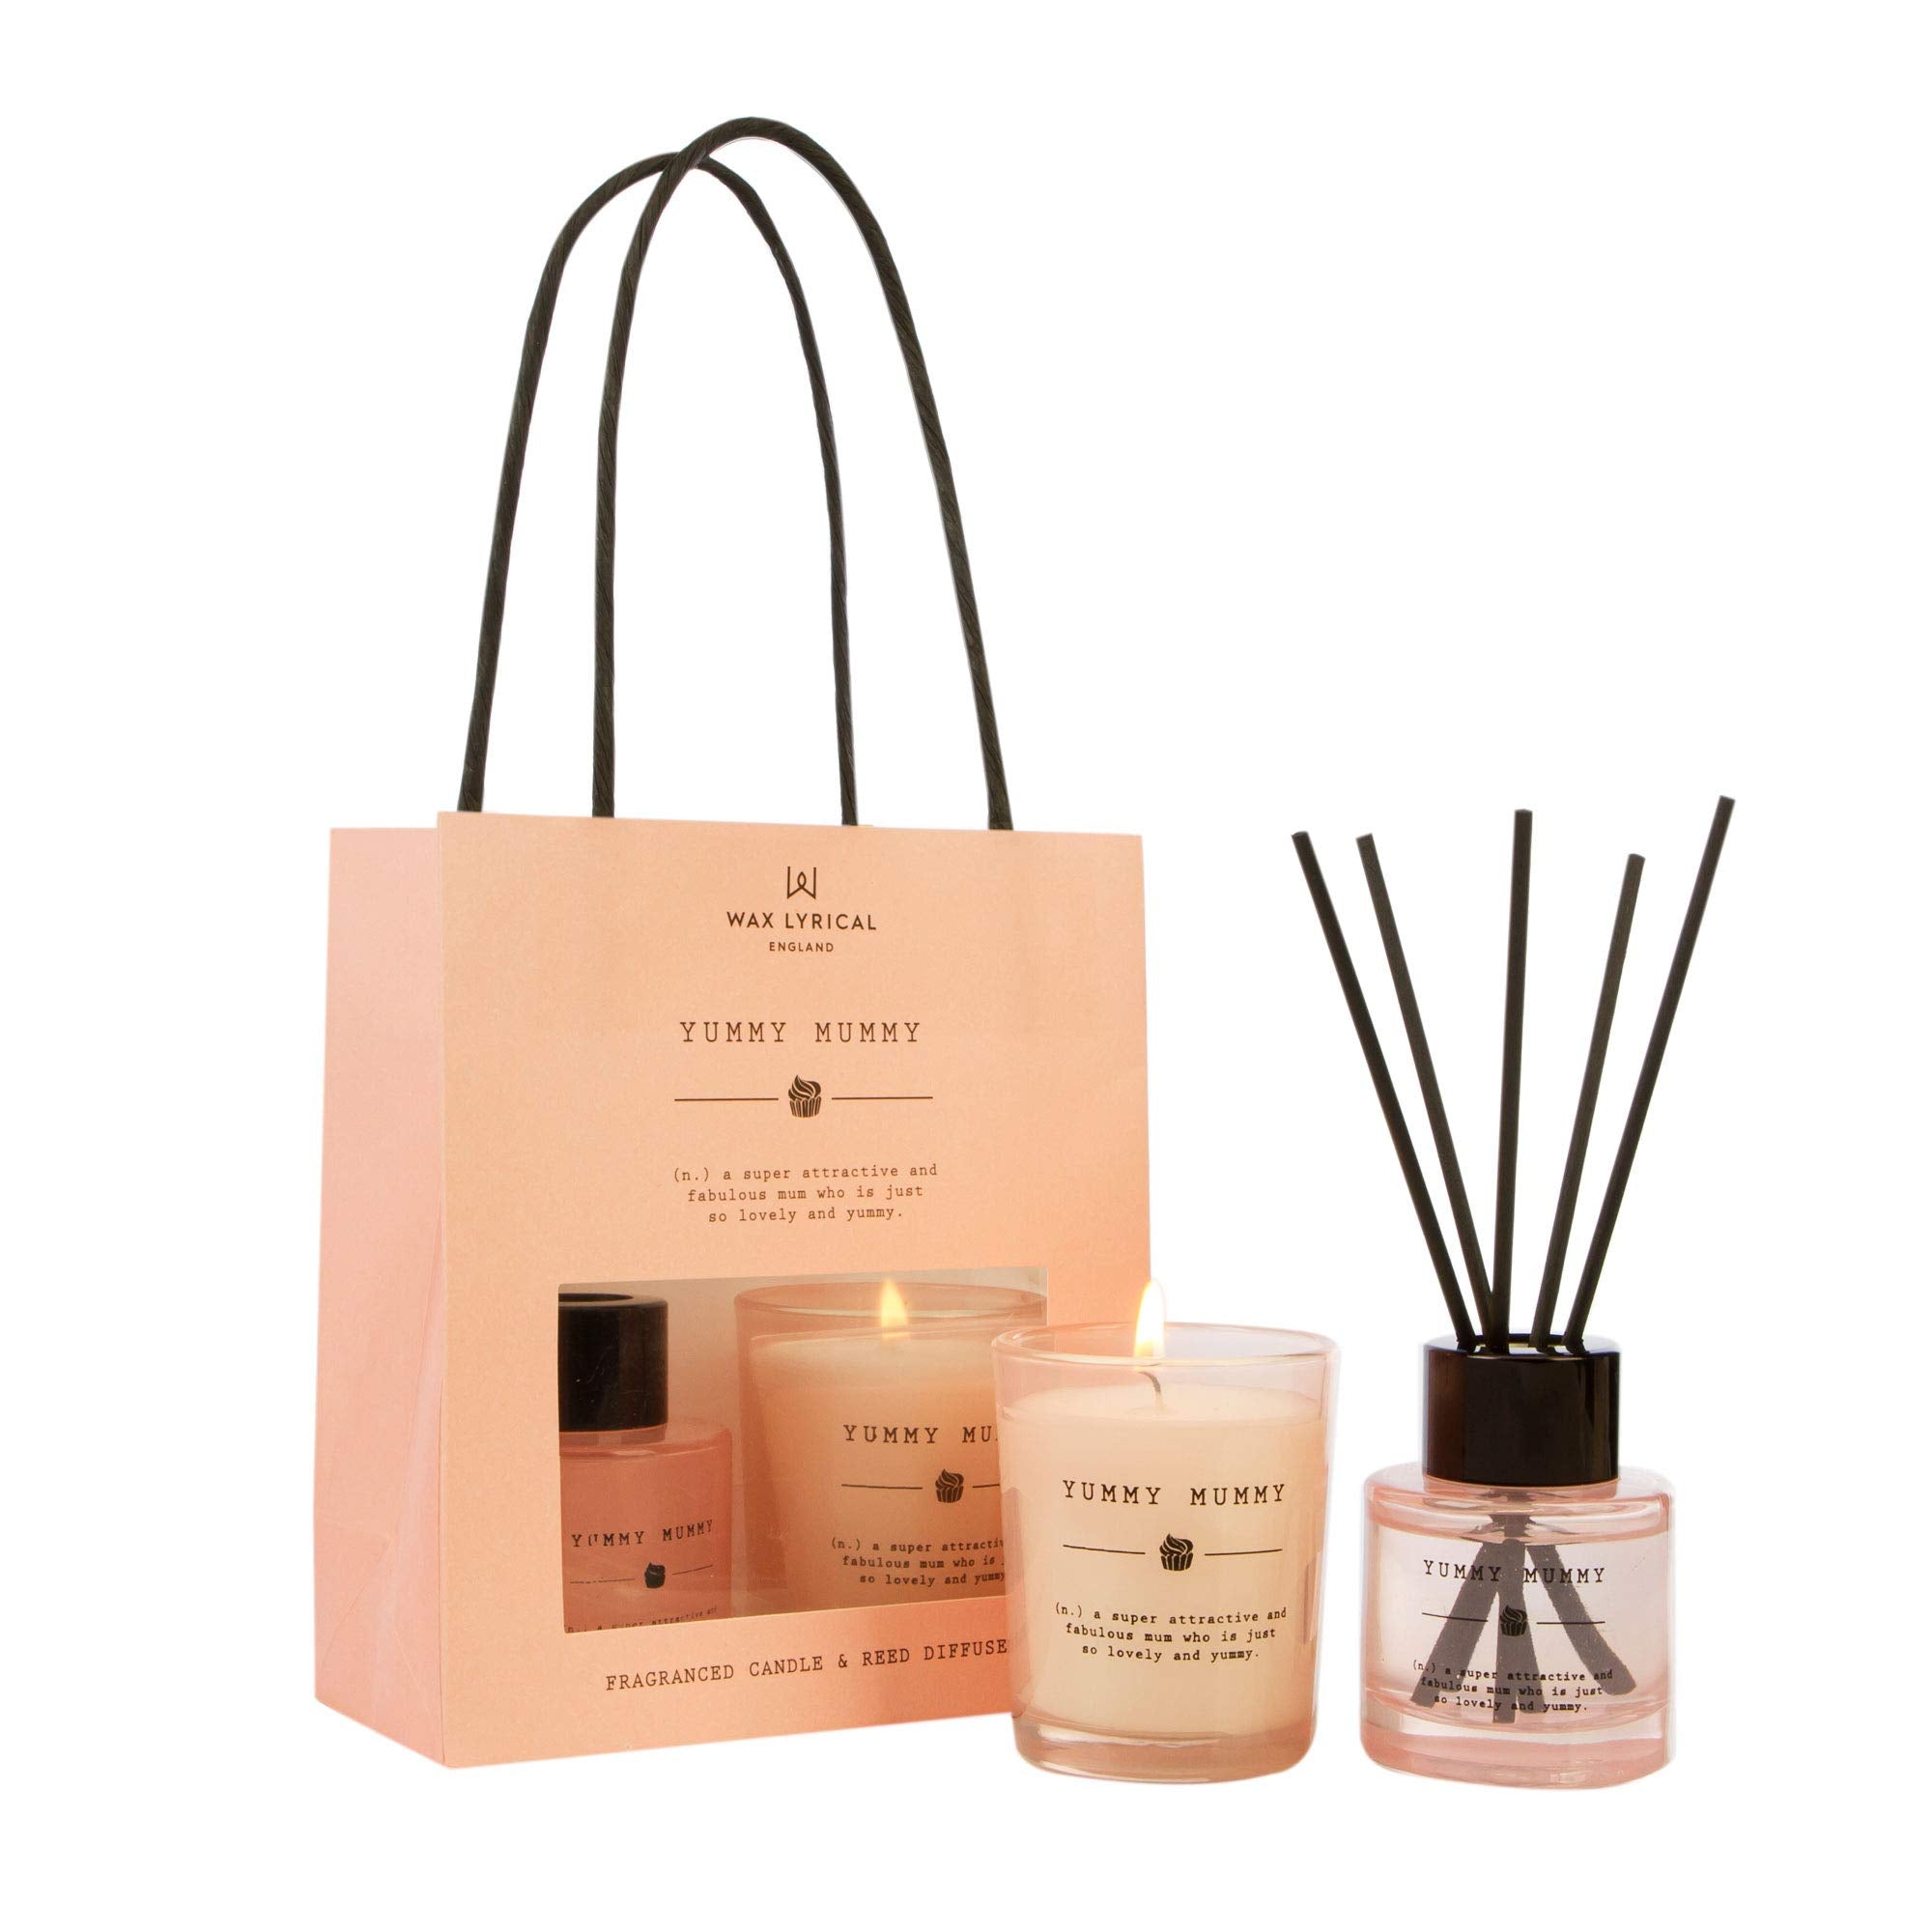 Wax Lyrical Yummy Mummy Candle and Reed Diffuser Gift Bag